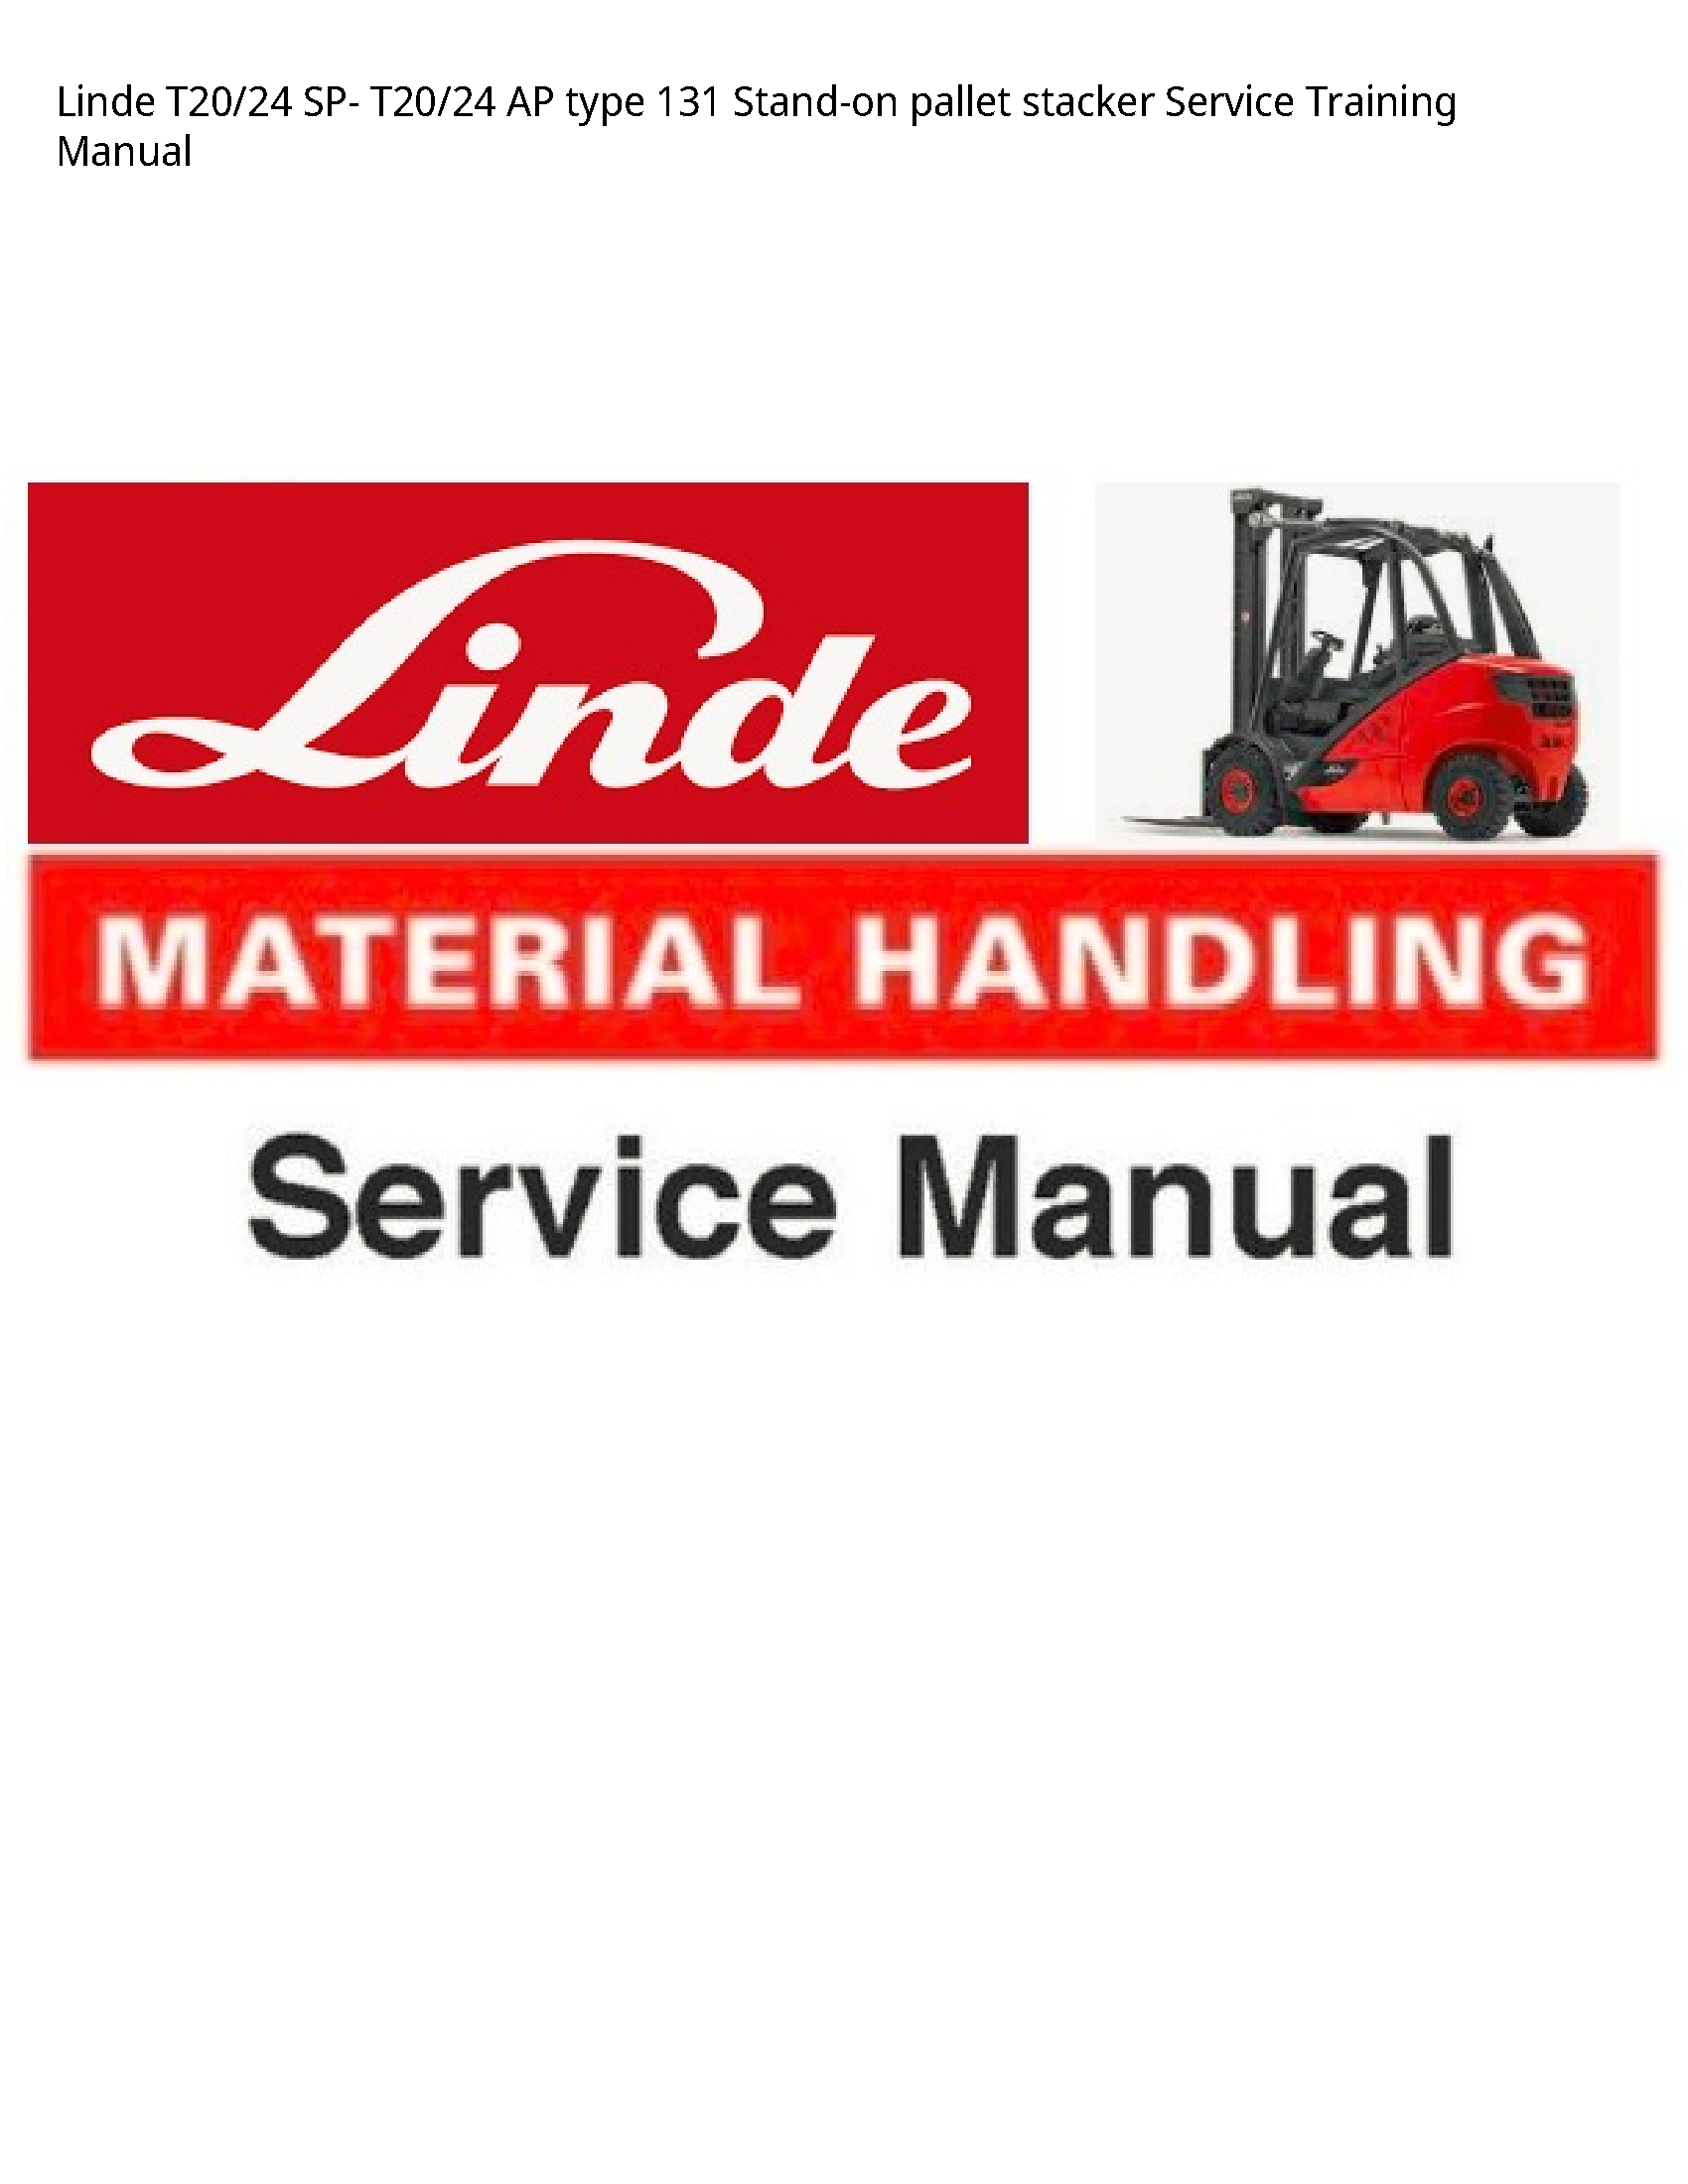 Linde T20 SP- AP type Stand-on pallet stacker Service Training manual